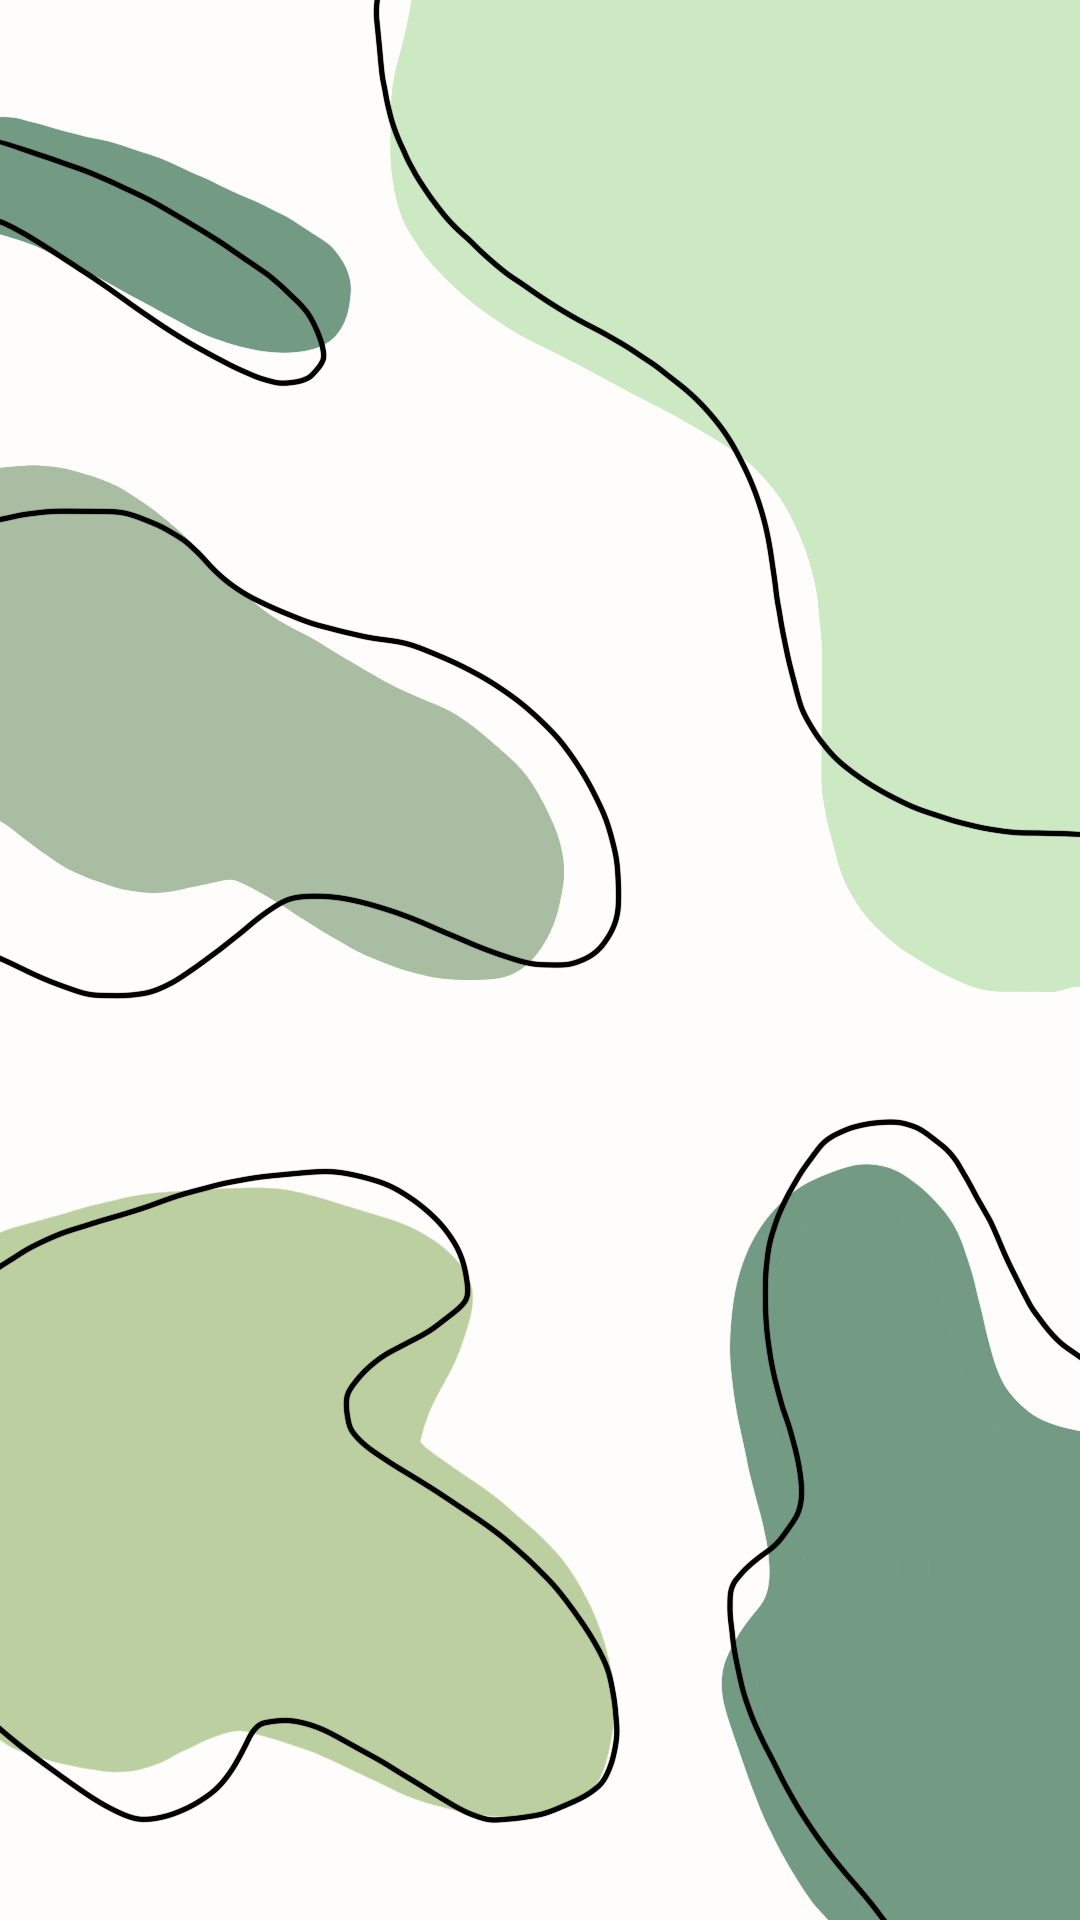 A set of abstract shapes in green tones on a light pink background. - Green